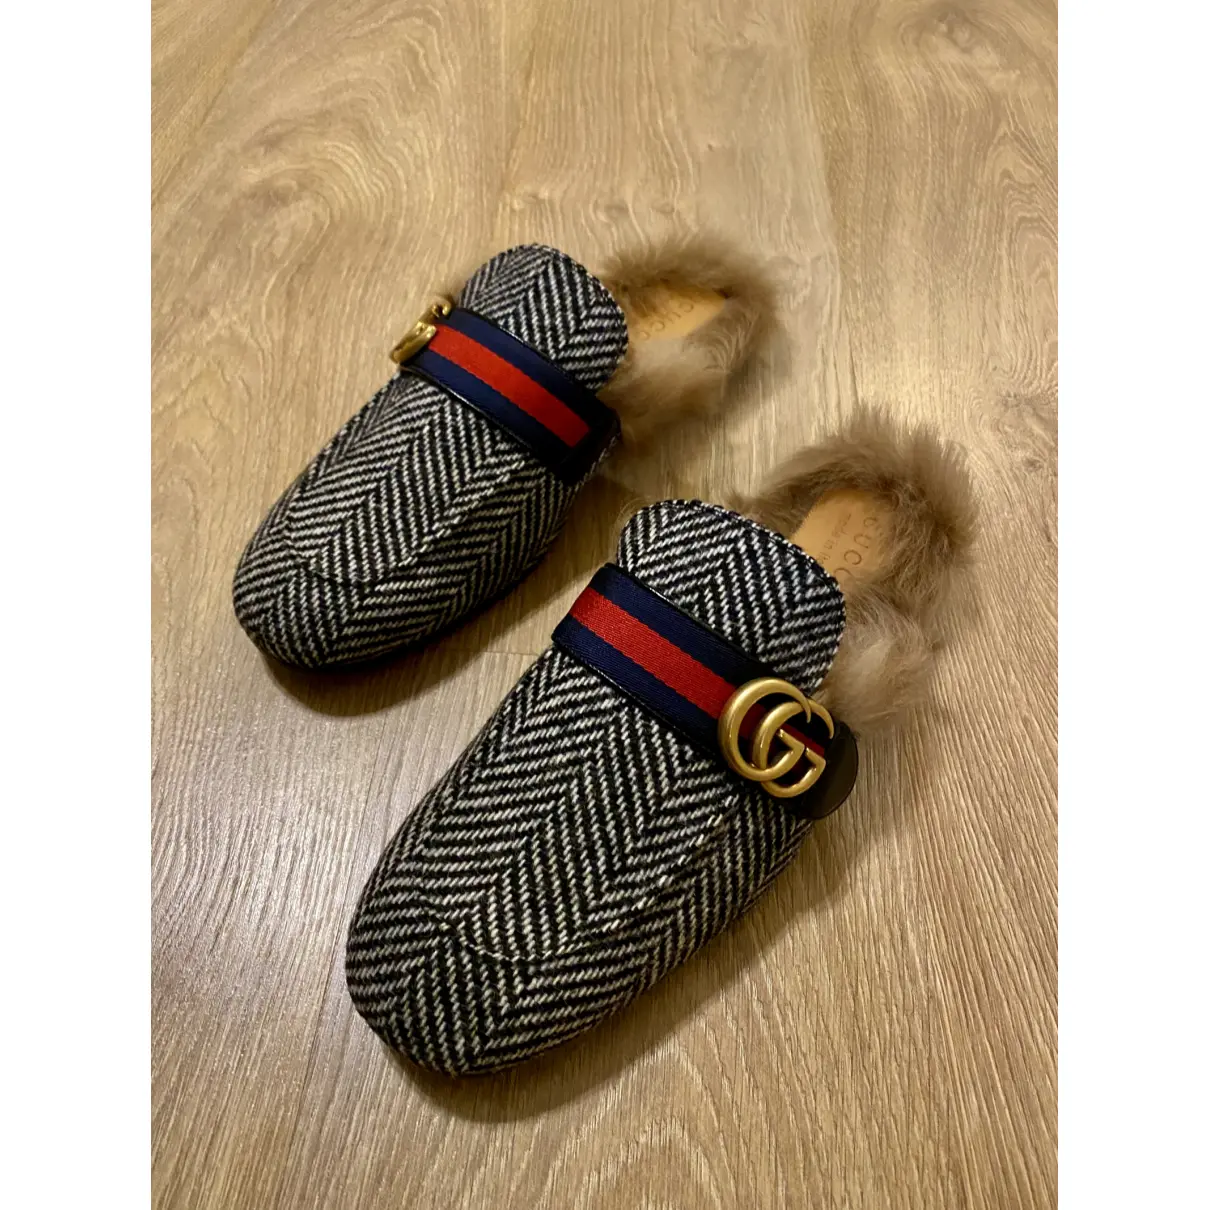 Princetown leather sandals Gucci